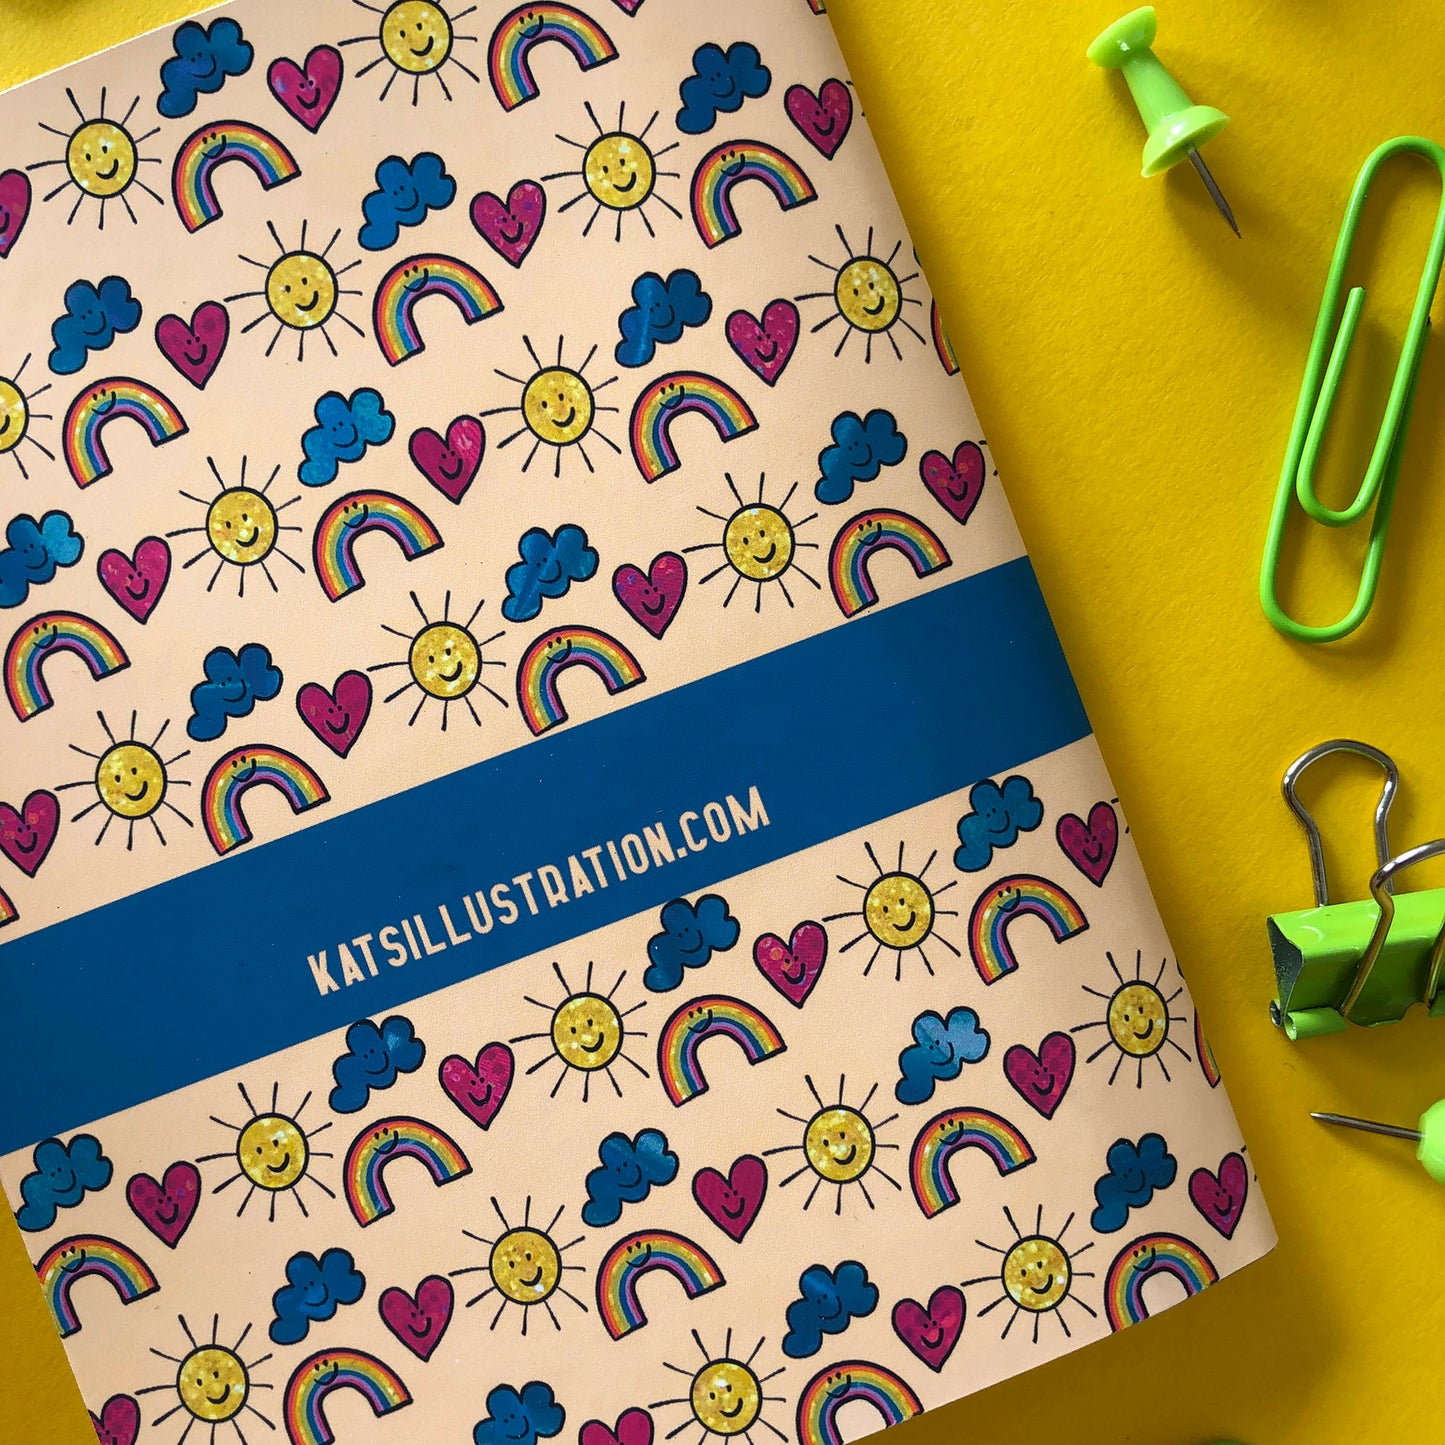 Image shows the back of a patterned notebook with illustrations of suns, clouds, hearts and rainbows with smiling faces.